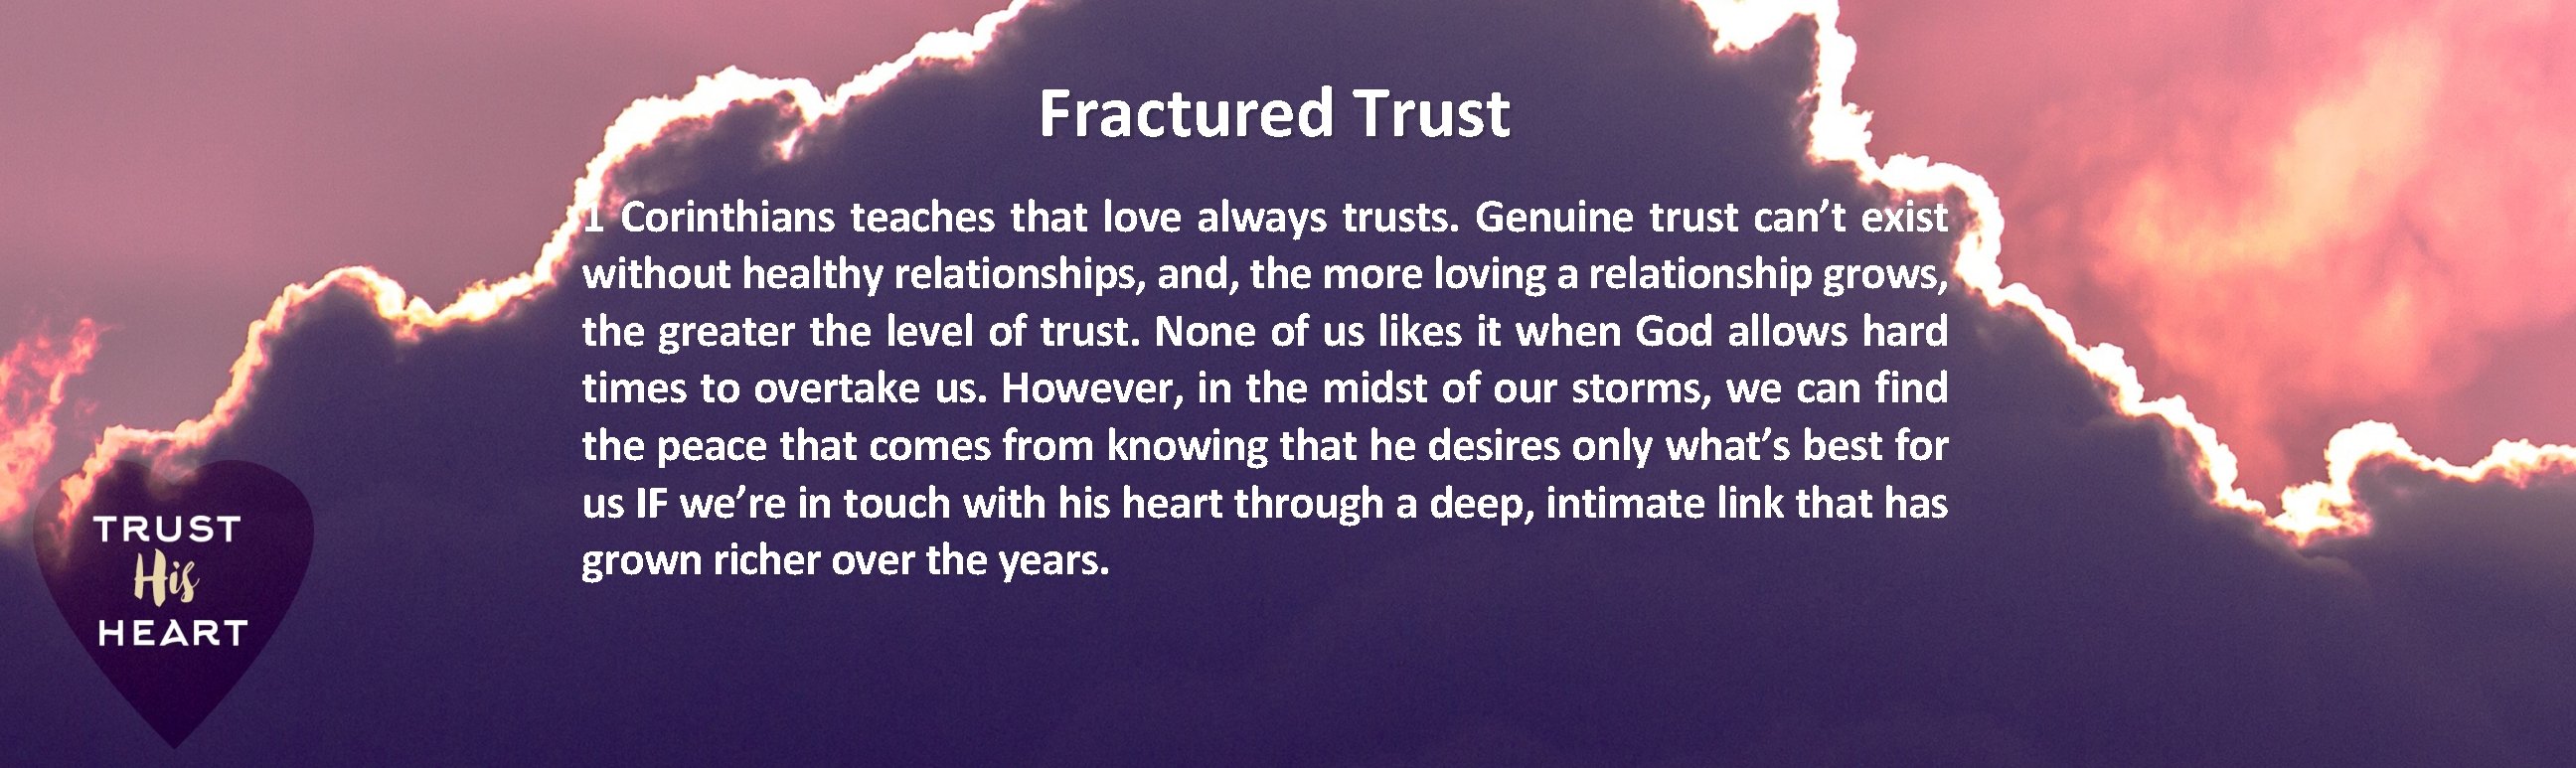 Fractured Trust 1 Corinthians teaches that love always trusts. Genuine trust can’t exist without